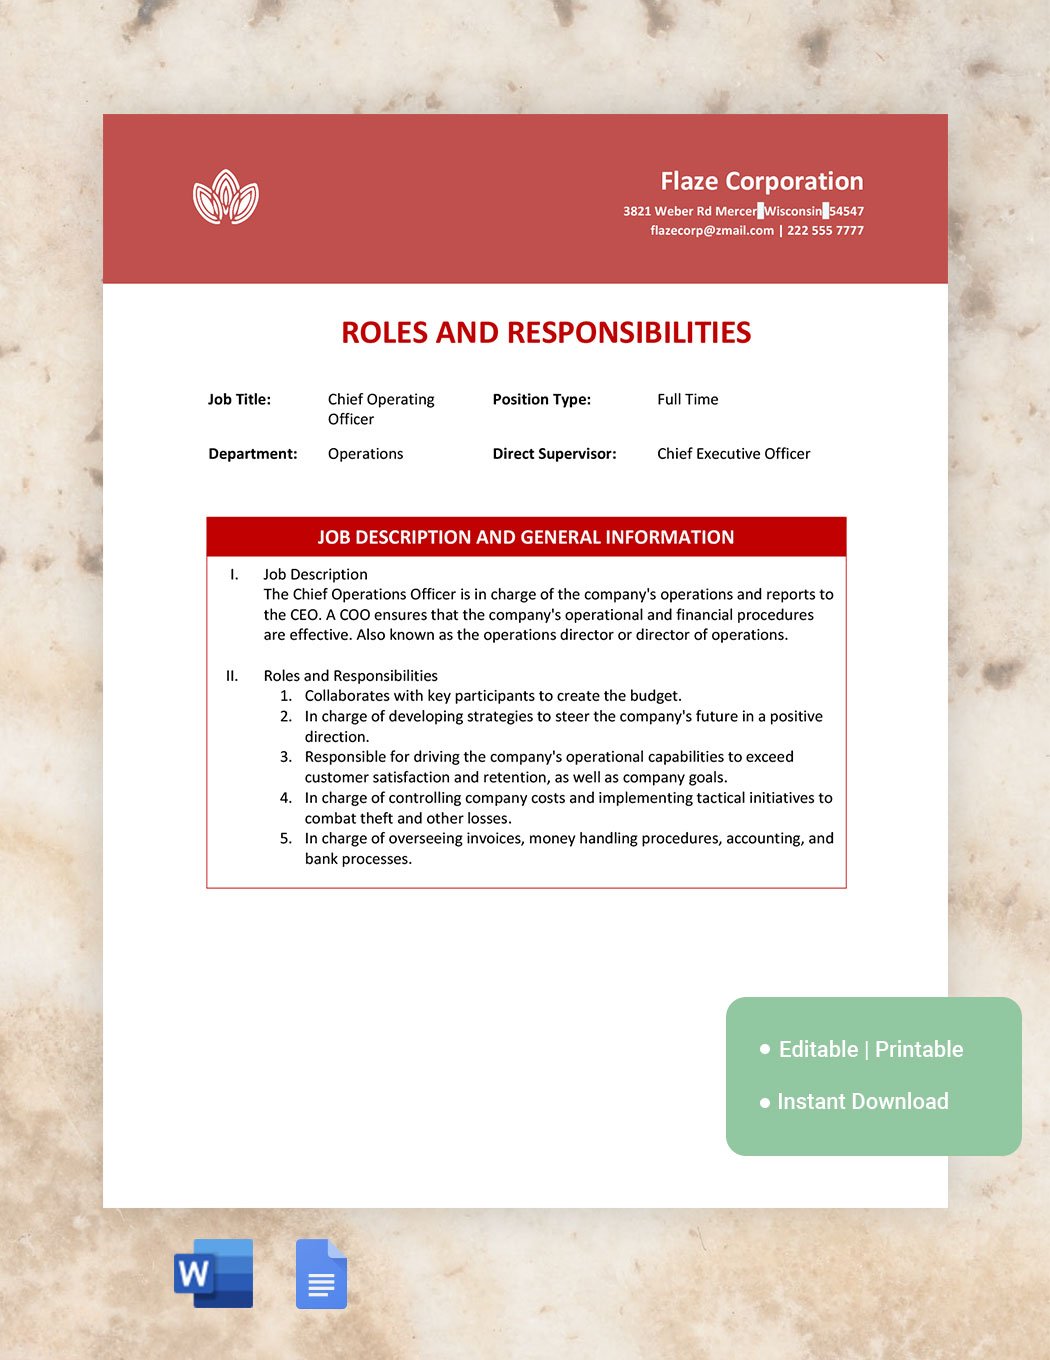 Company Roles And Responsibilities Template